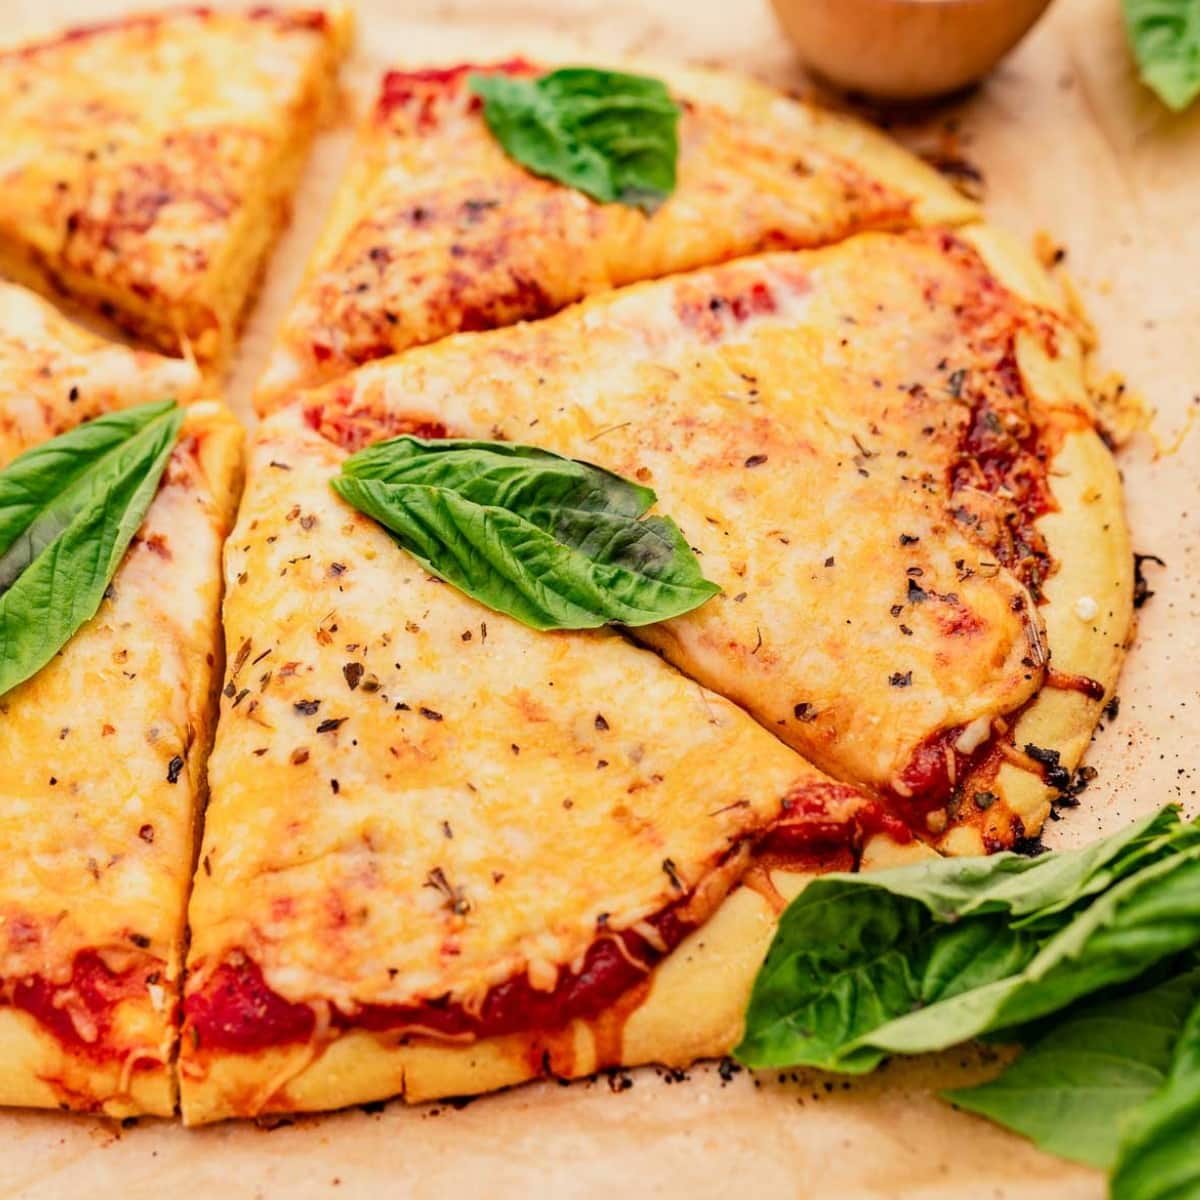 A close-up of a sliced cheese pizza with a chickpea flour crust, garnished with fresh basil leaves on a light surface.